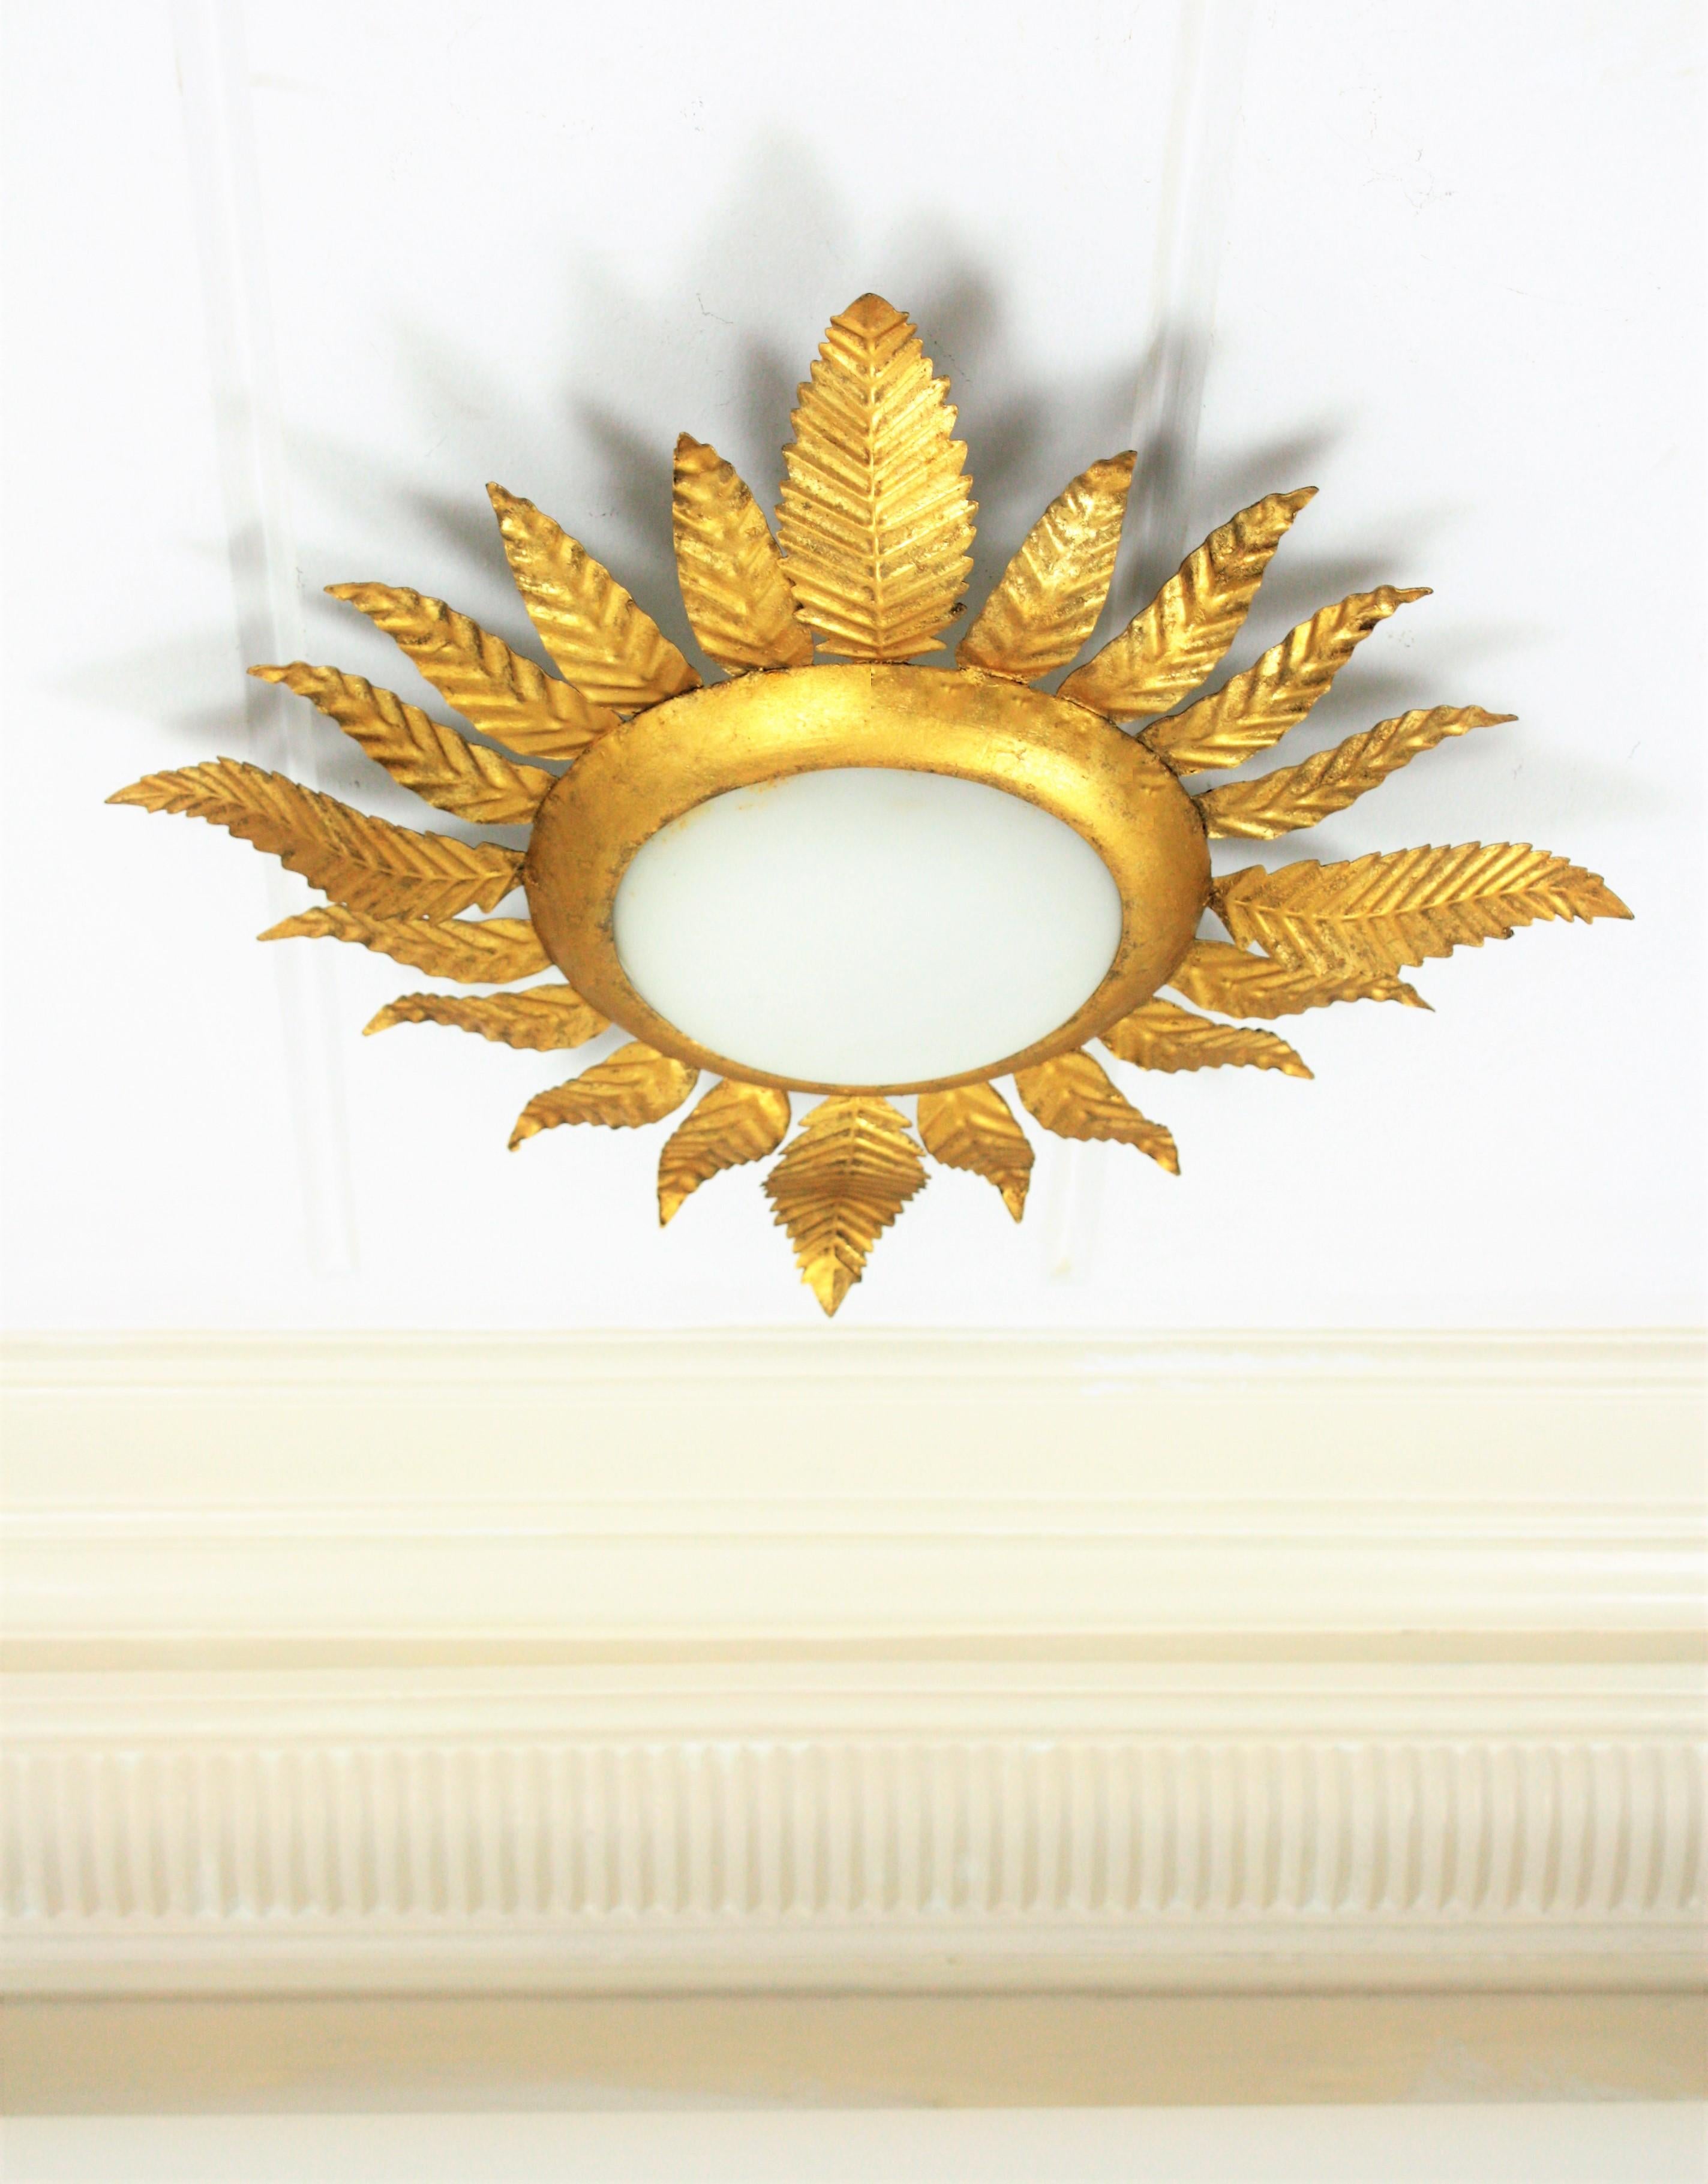 A nice gilt iron flower  / sunburst flush mount with leafed frame. France,1950s
This light fixture features an opaline glass circular shade surrounded by a frame of hand-hammered iron leaves with gold leaf finishing.
It can work as ceiling light and